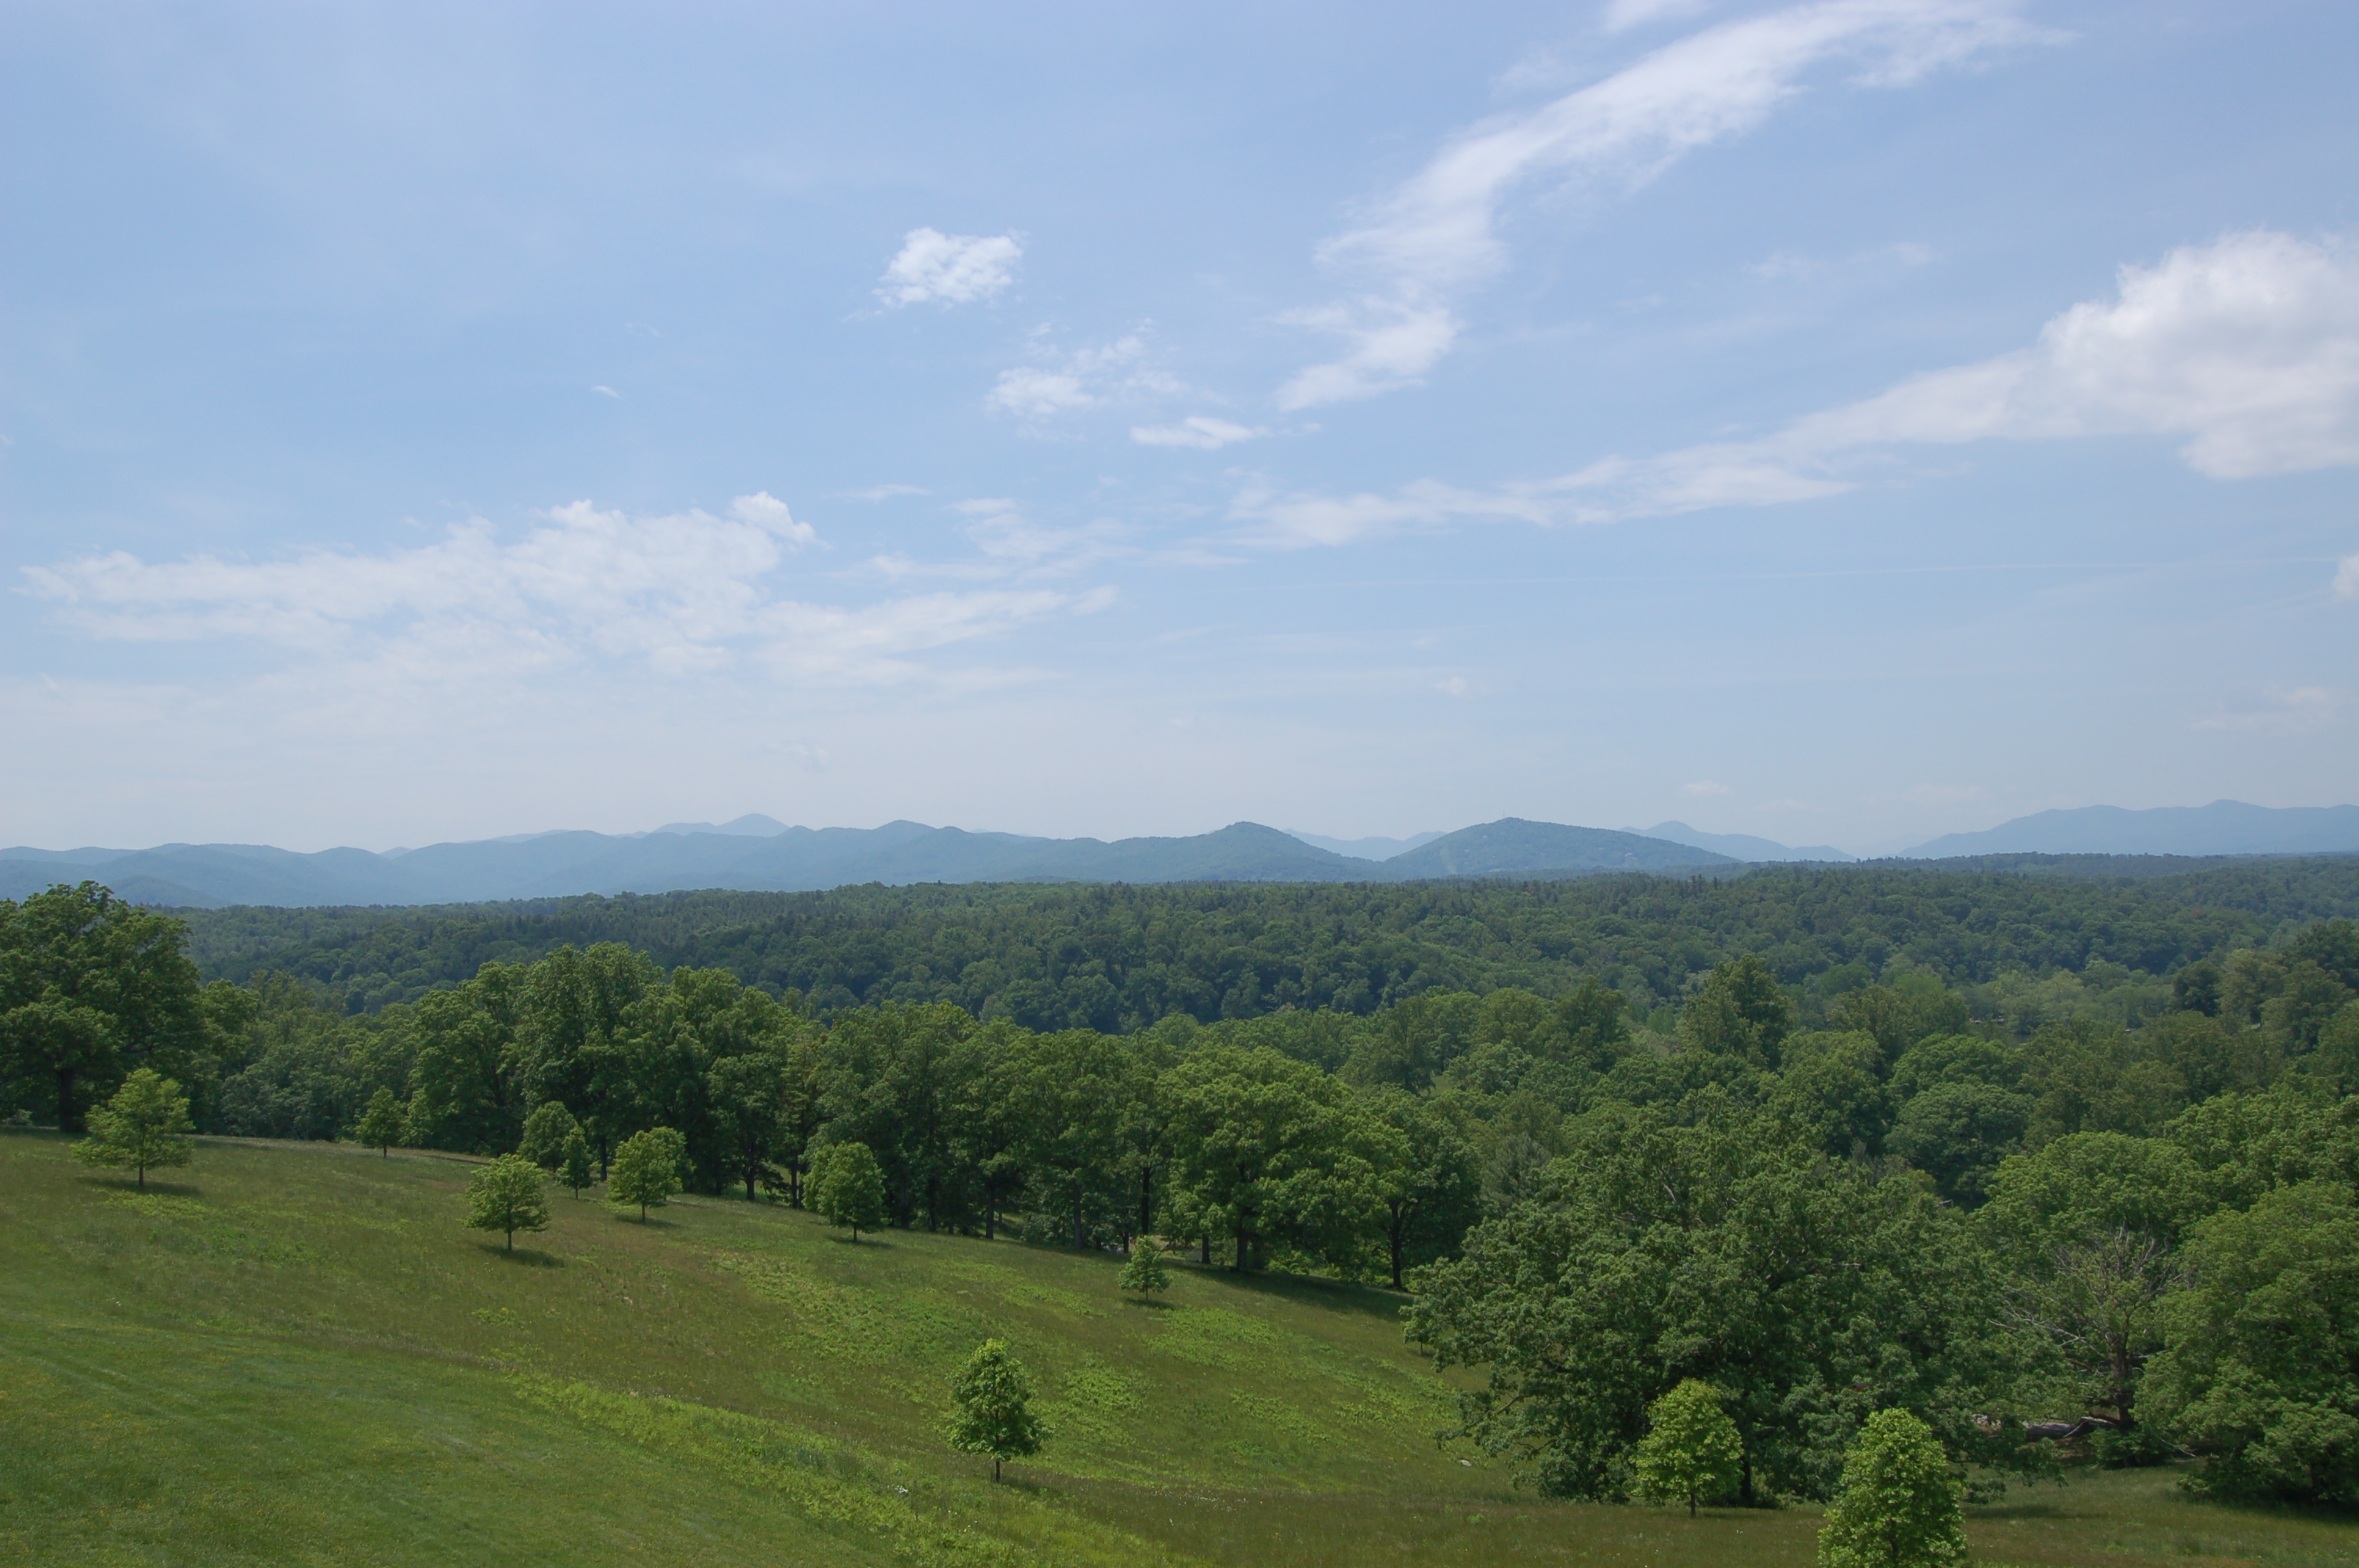 View from Biltmore Estate